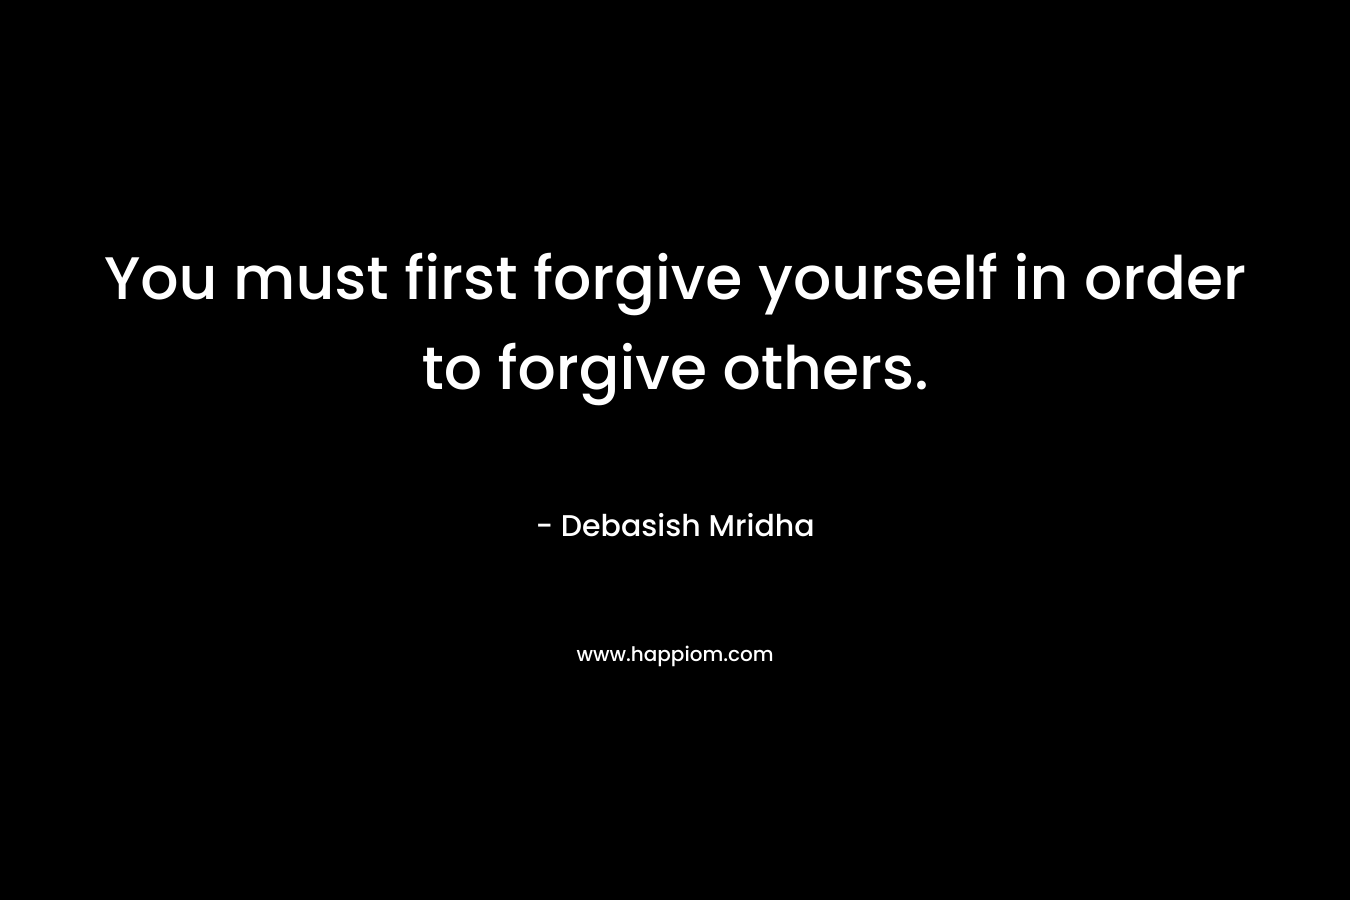 You must first forgive yourself in order to forgive others.